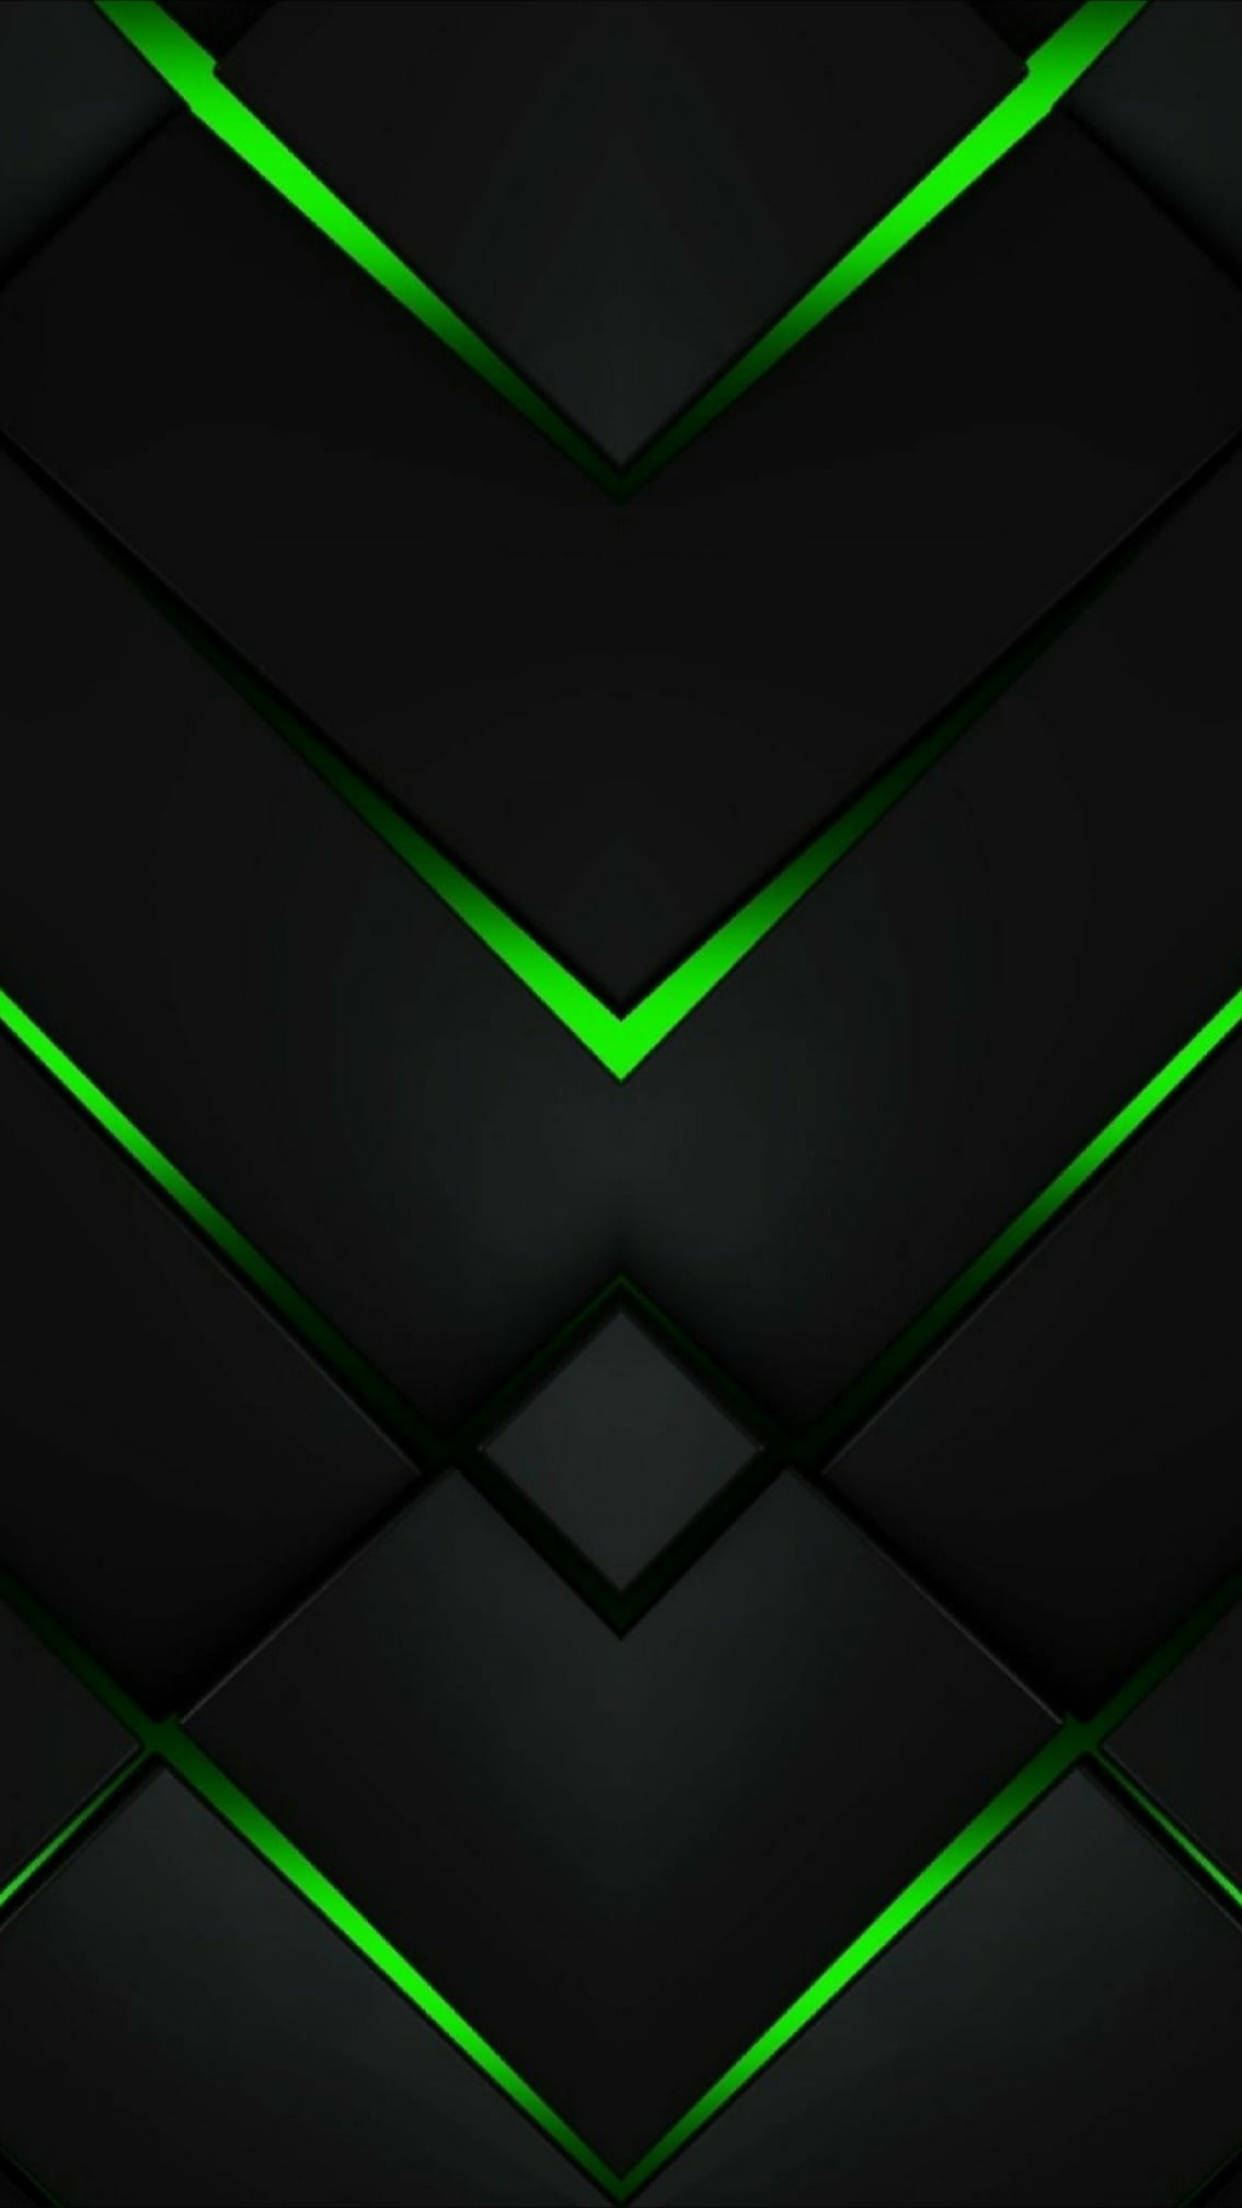 Green And Black Iphone 6 Plus Wallpaper